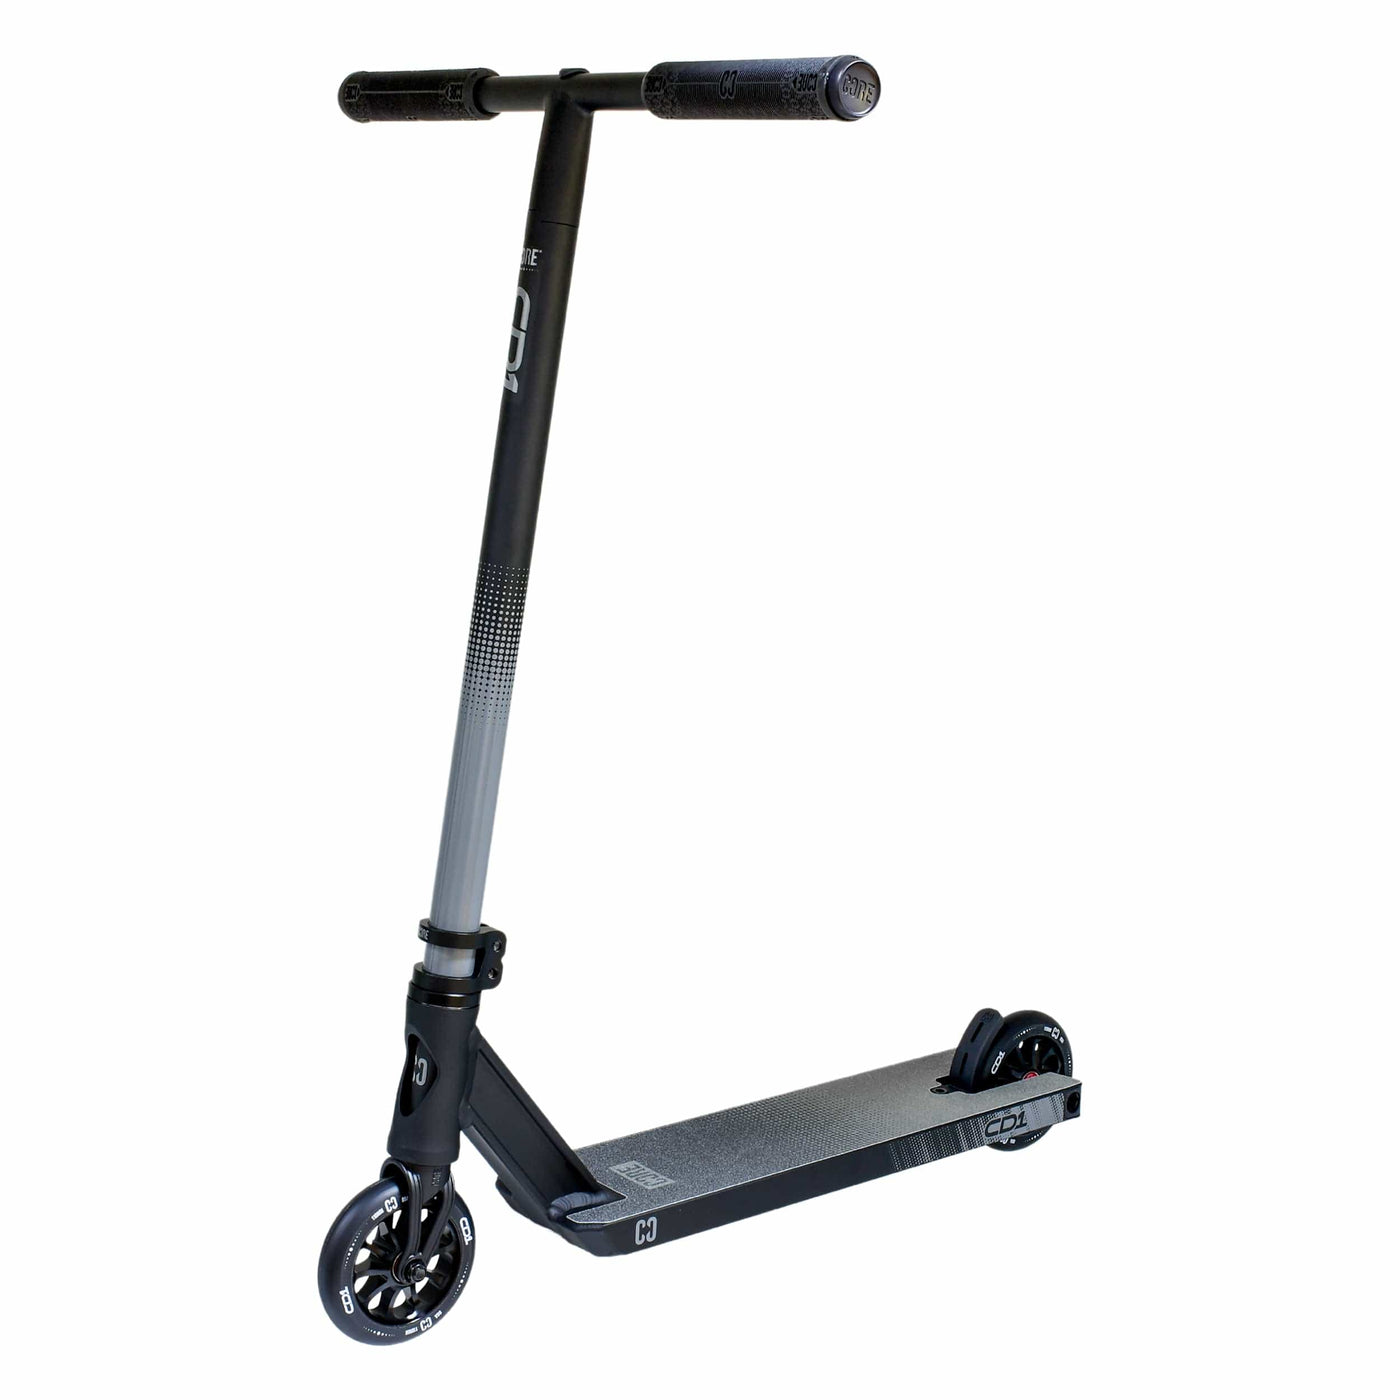 CORE CD1 Complete Stunt Scooter Black I Adult Stunt Scooter Front Angled